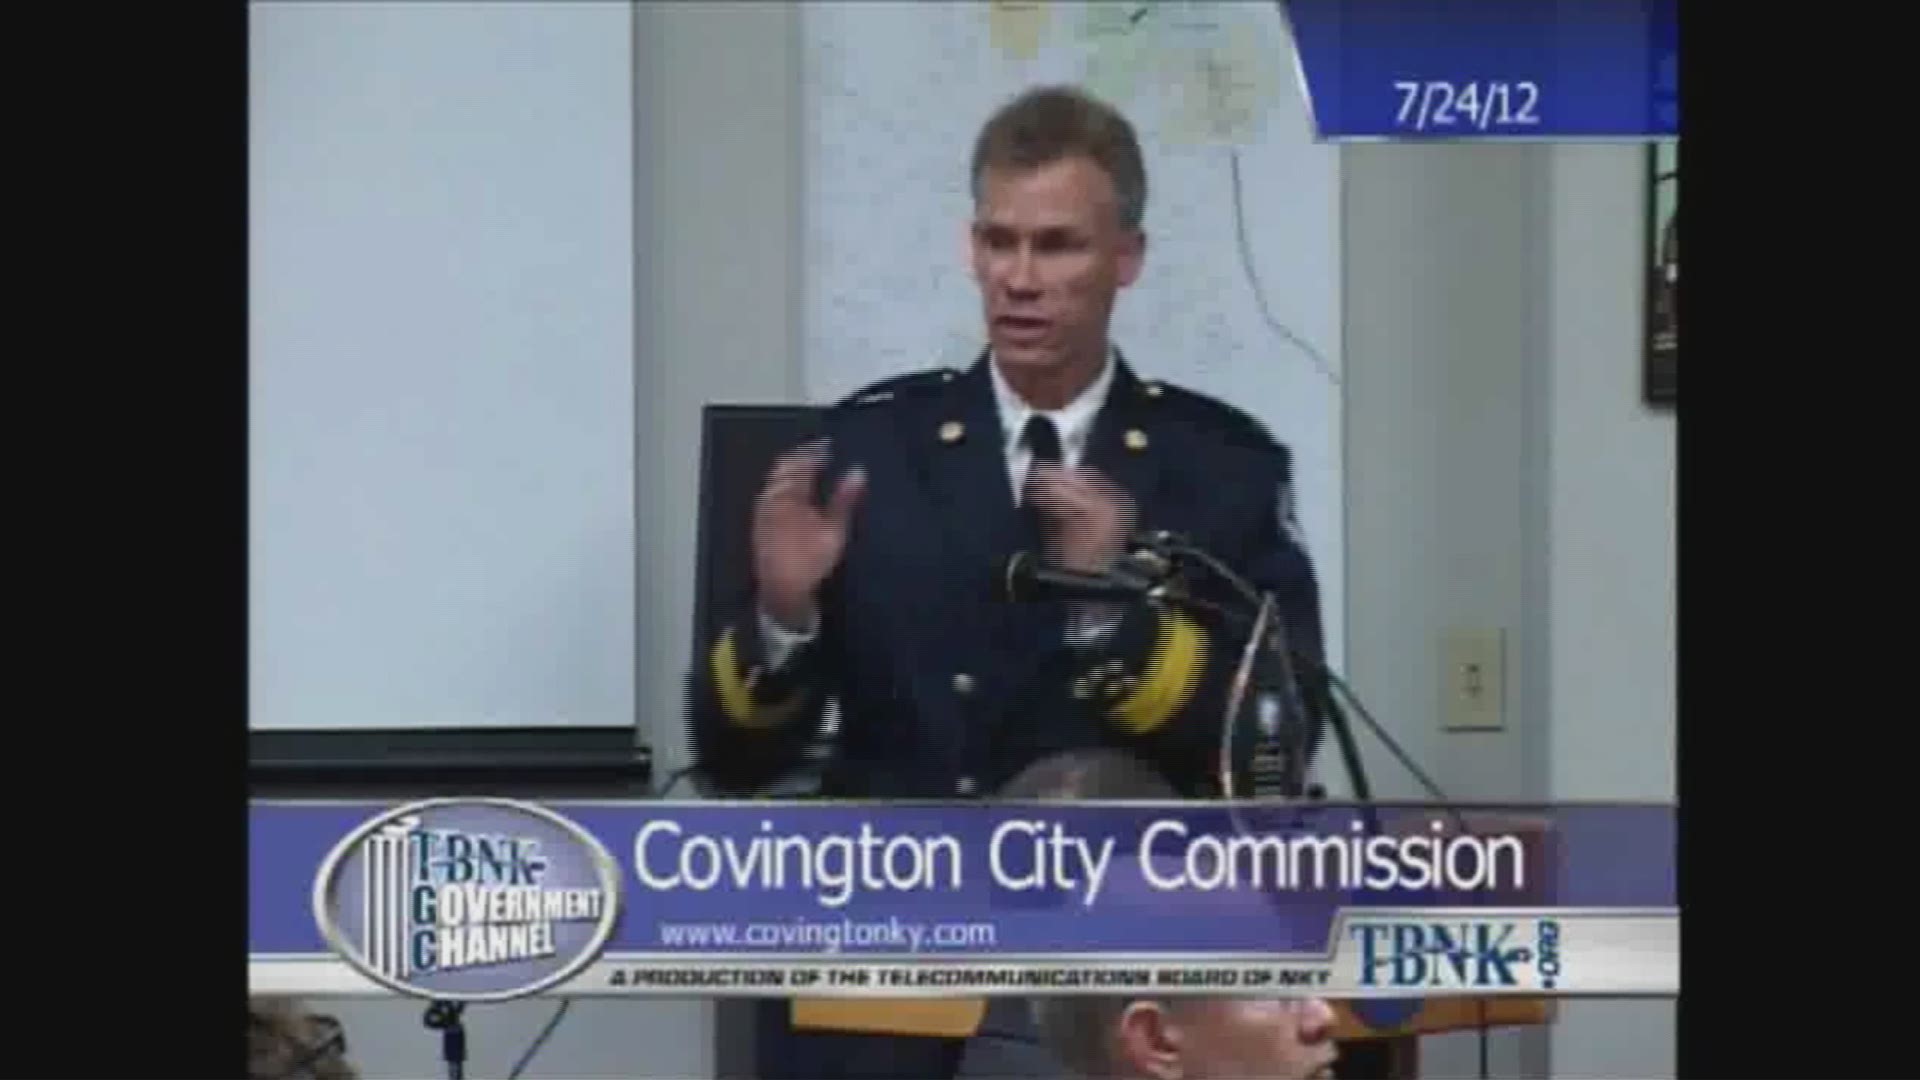 Chief Chip Terry delivers a powerful speech when retired from the Covington Fire Department in 2012